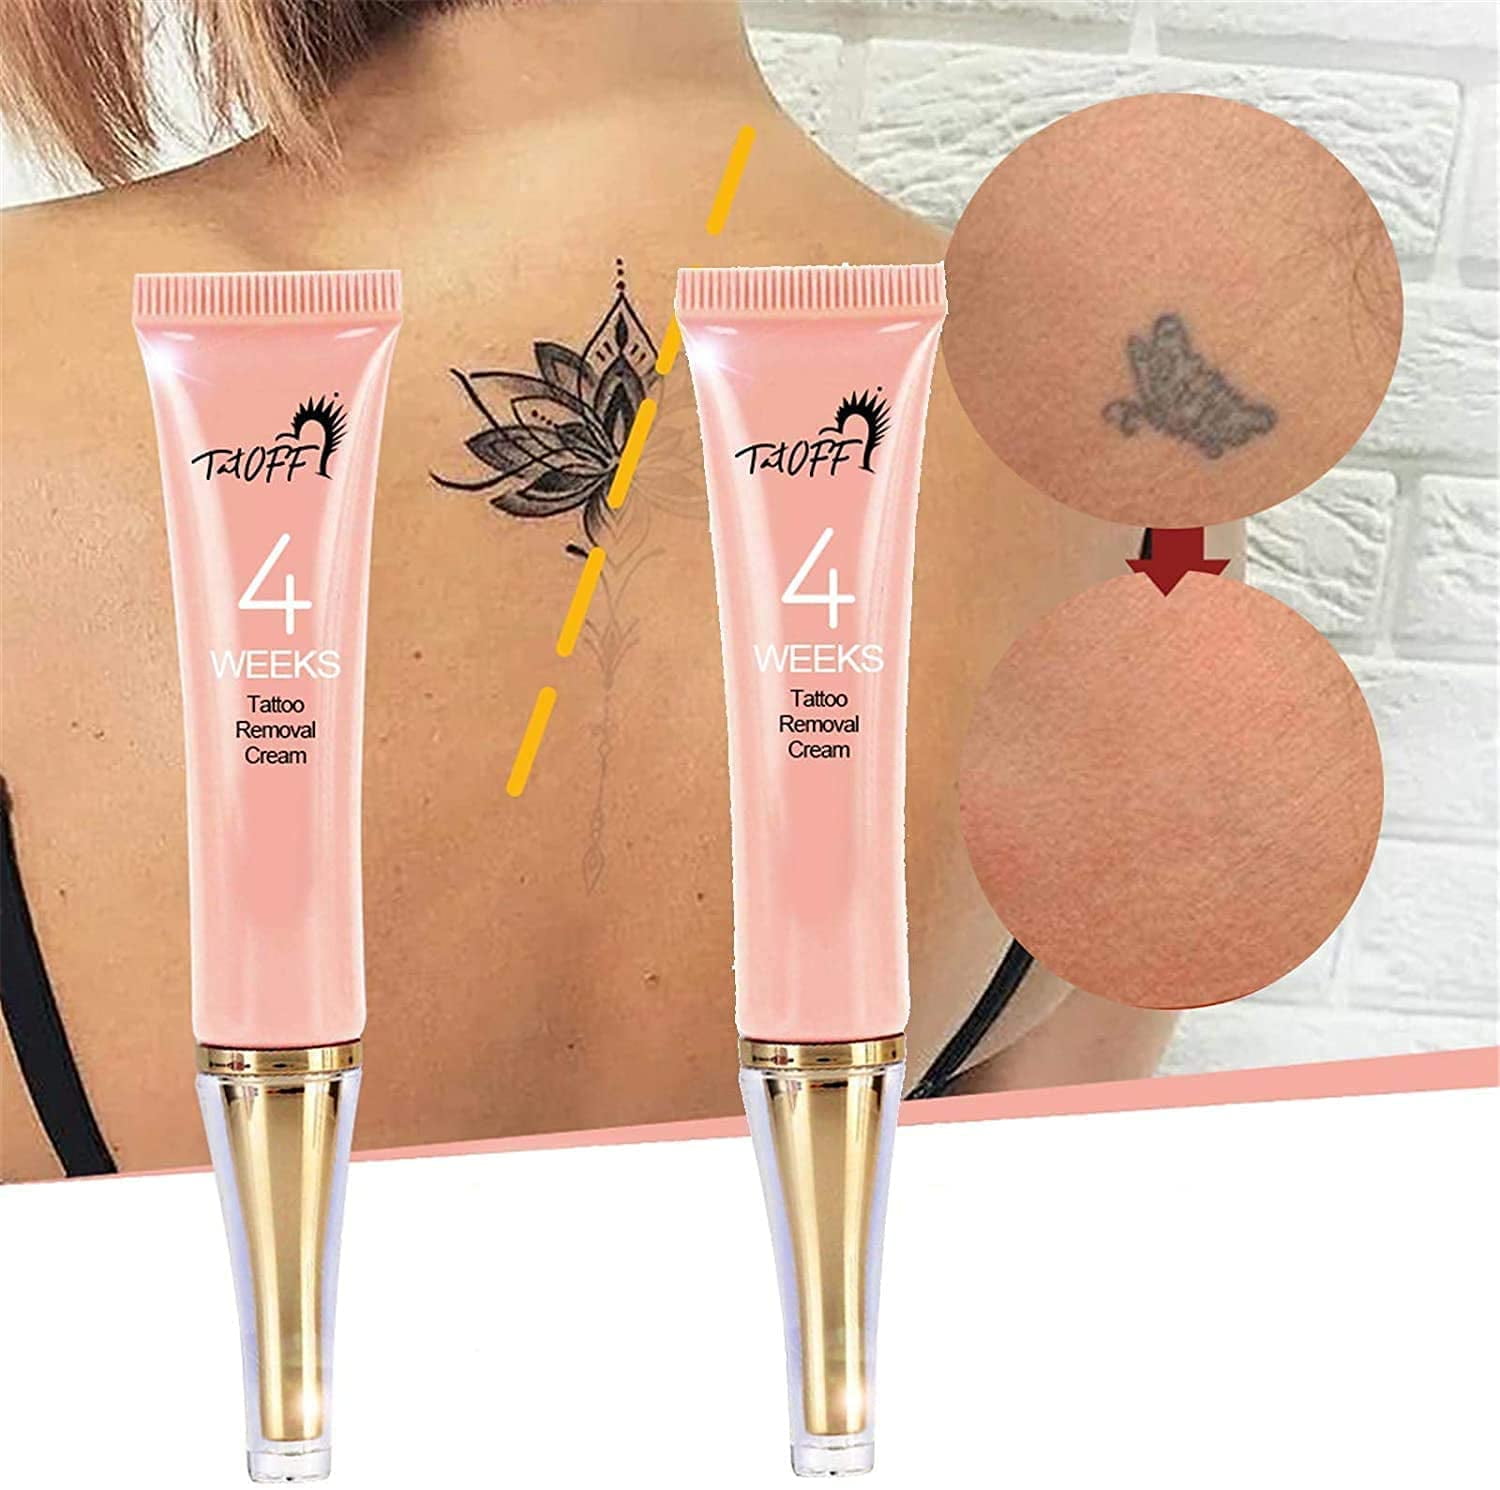 4 weeks tattoo removal cream,Tattoo remover,Permanent tattoo removal,tattoo  removalSafe moisturizing skin with black tattoos (2PC) 